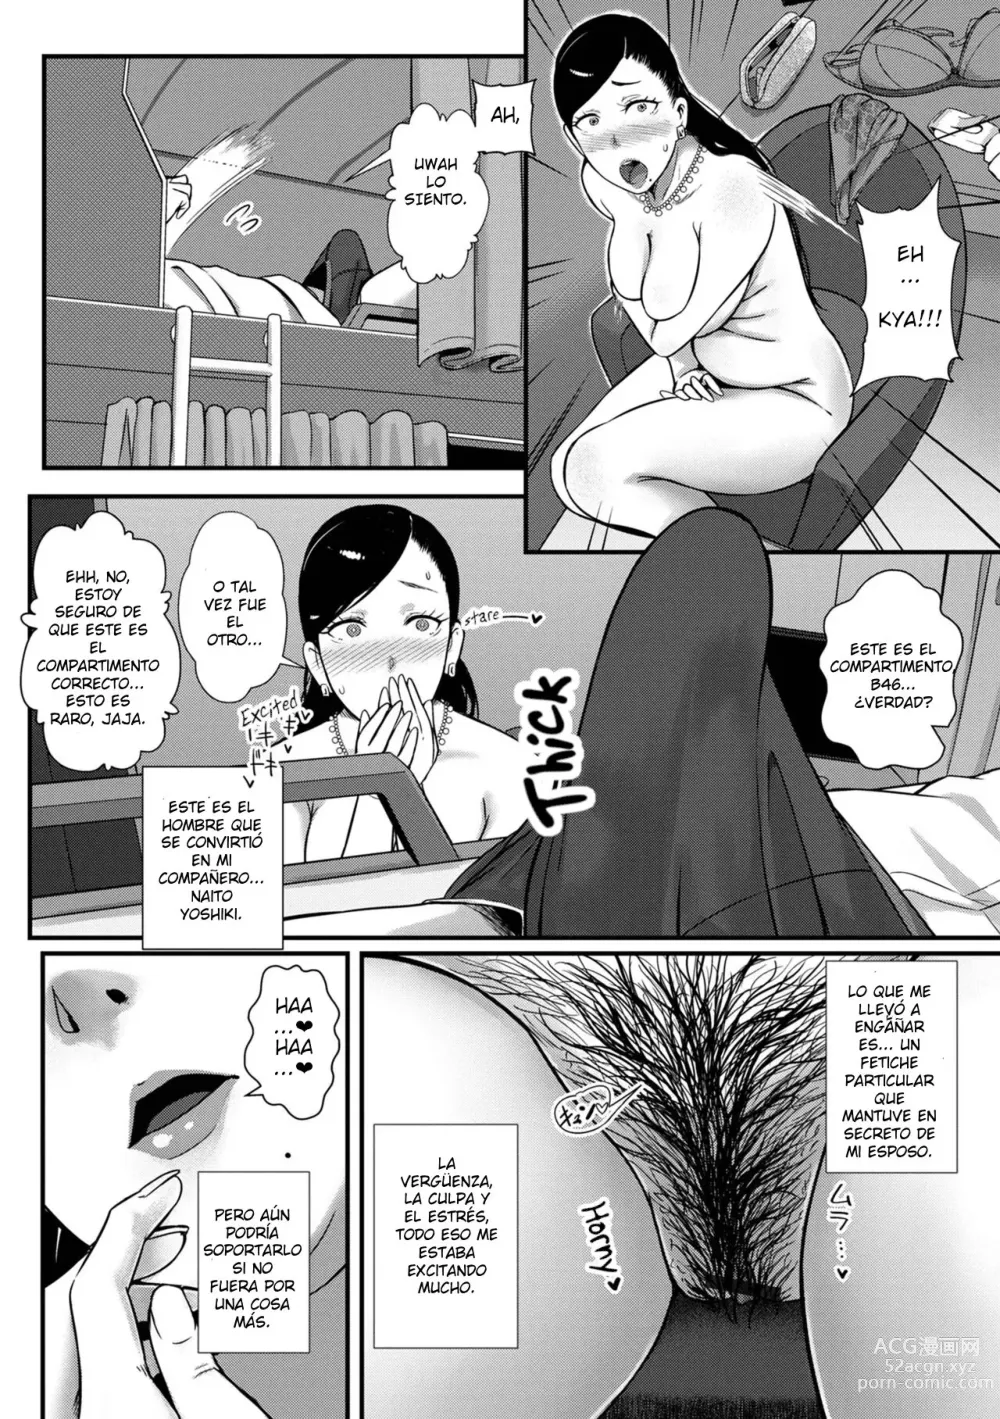 Page 4 of manga Only My Wife Should Be In This Compartment